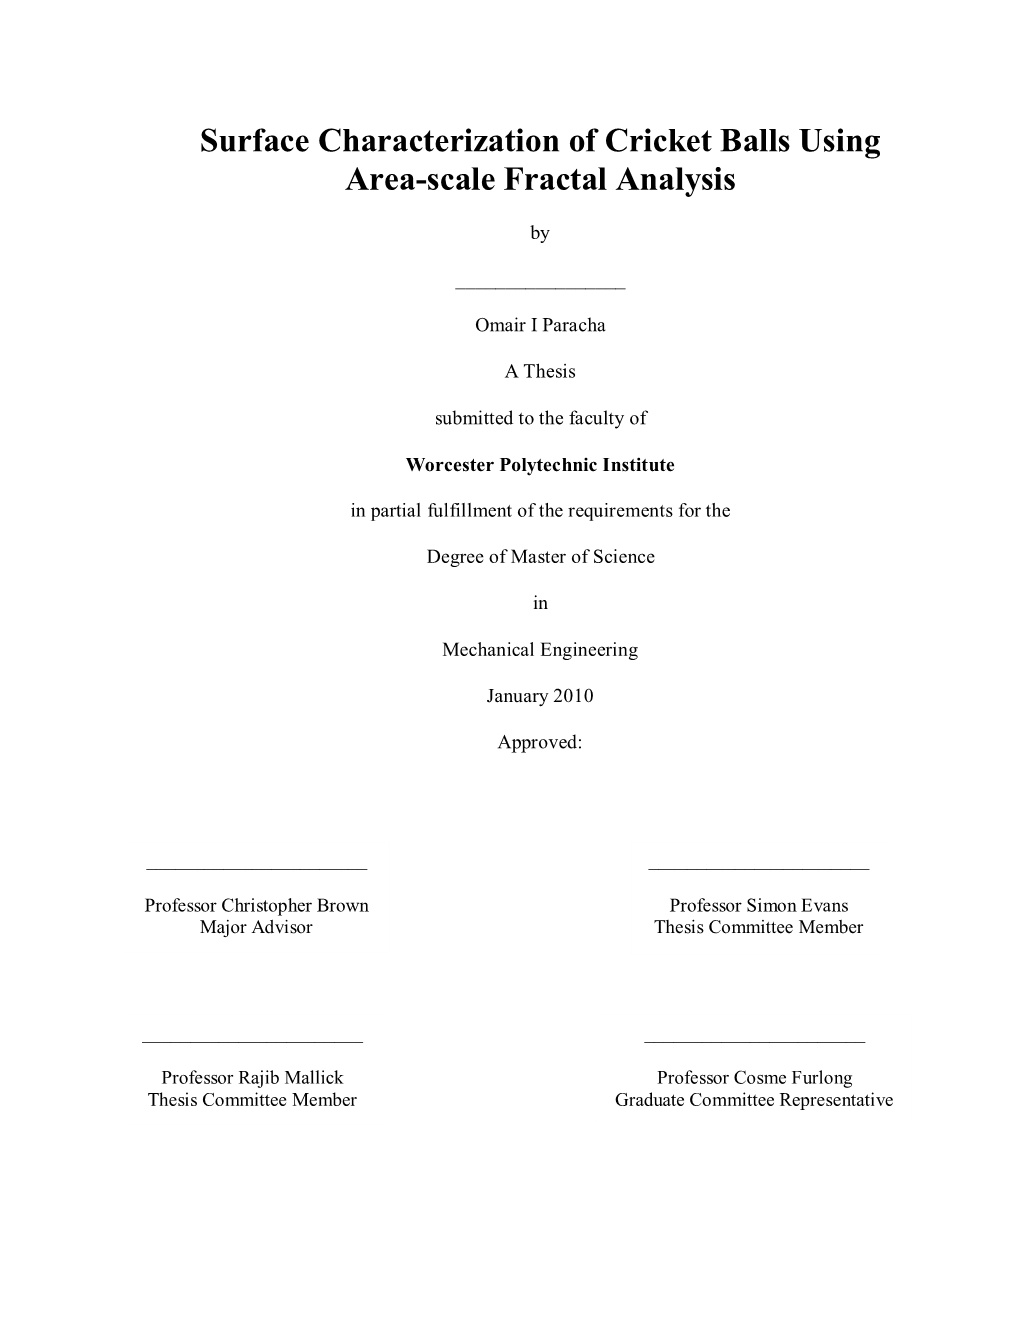 Surface Characterization of Cricket Balls Using Area-Scale Fractal Analysis